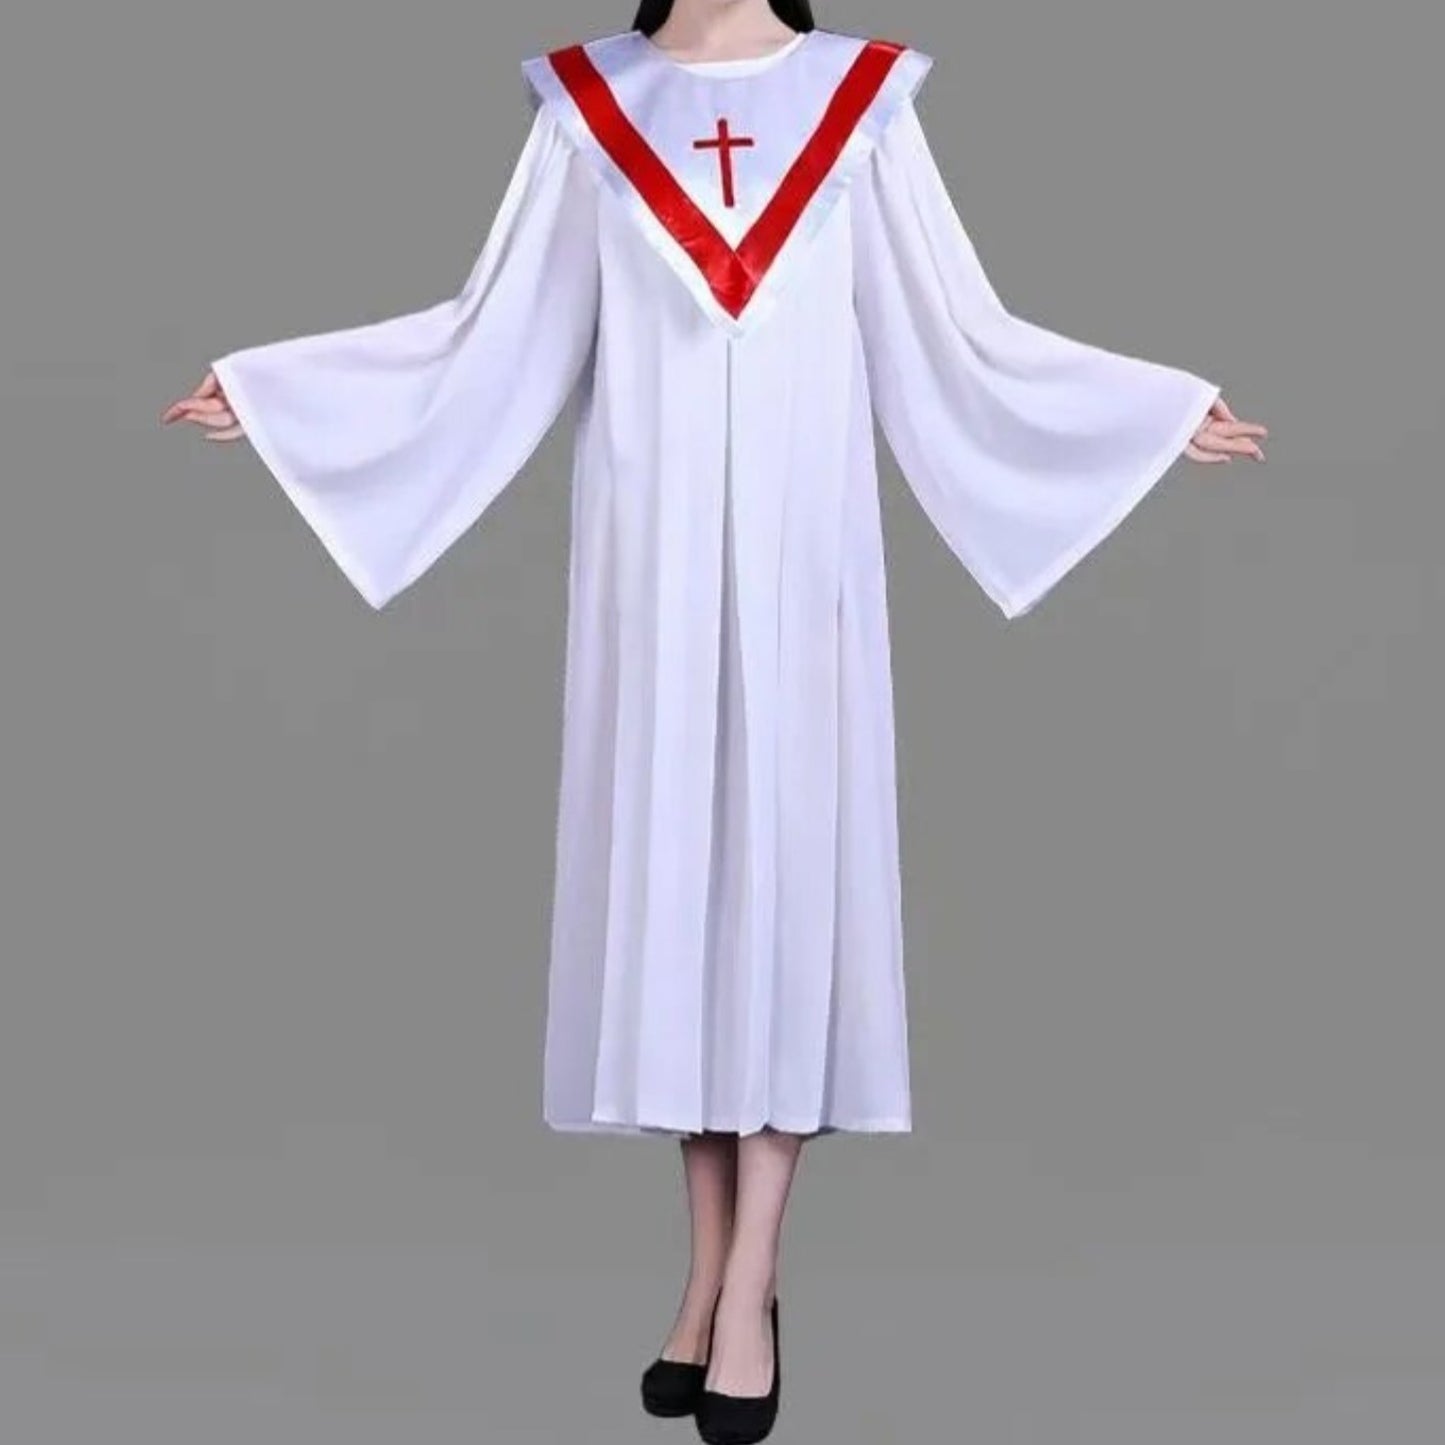 Christian Church Choir Robes Multi-Style - Red Basic, In God's Service store